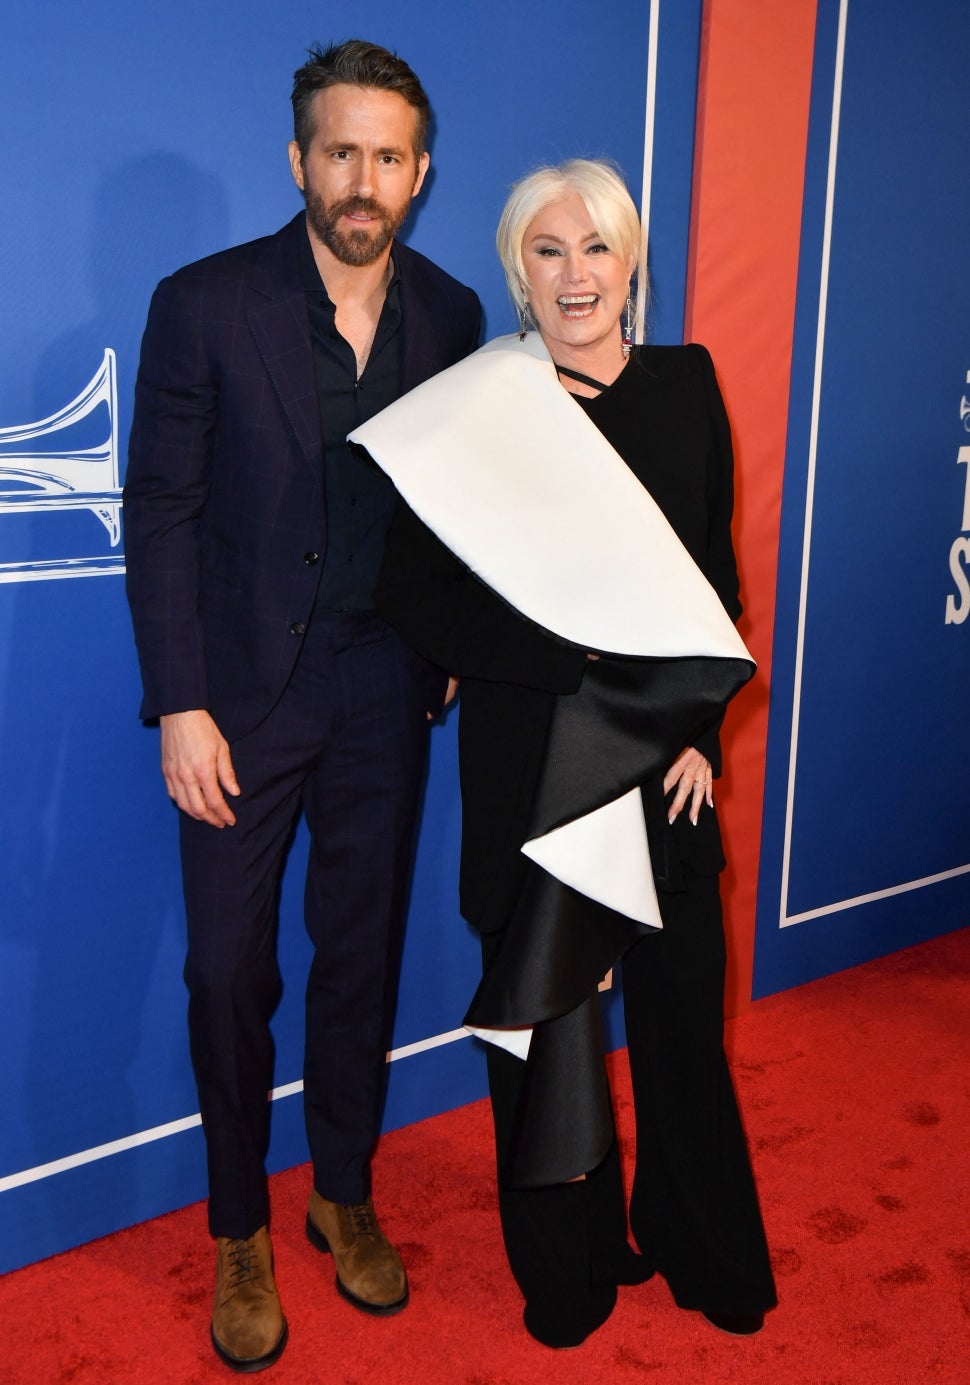 Ryan Reynolds and Australian actress Deborra-Lee Furness arrive for the opening night of Broadway musical "The Music Man" at Winter Garden Theater in New York City on February 10, 2022.